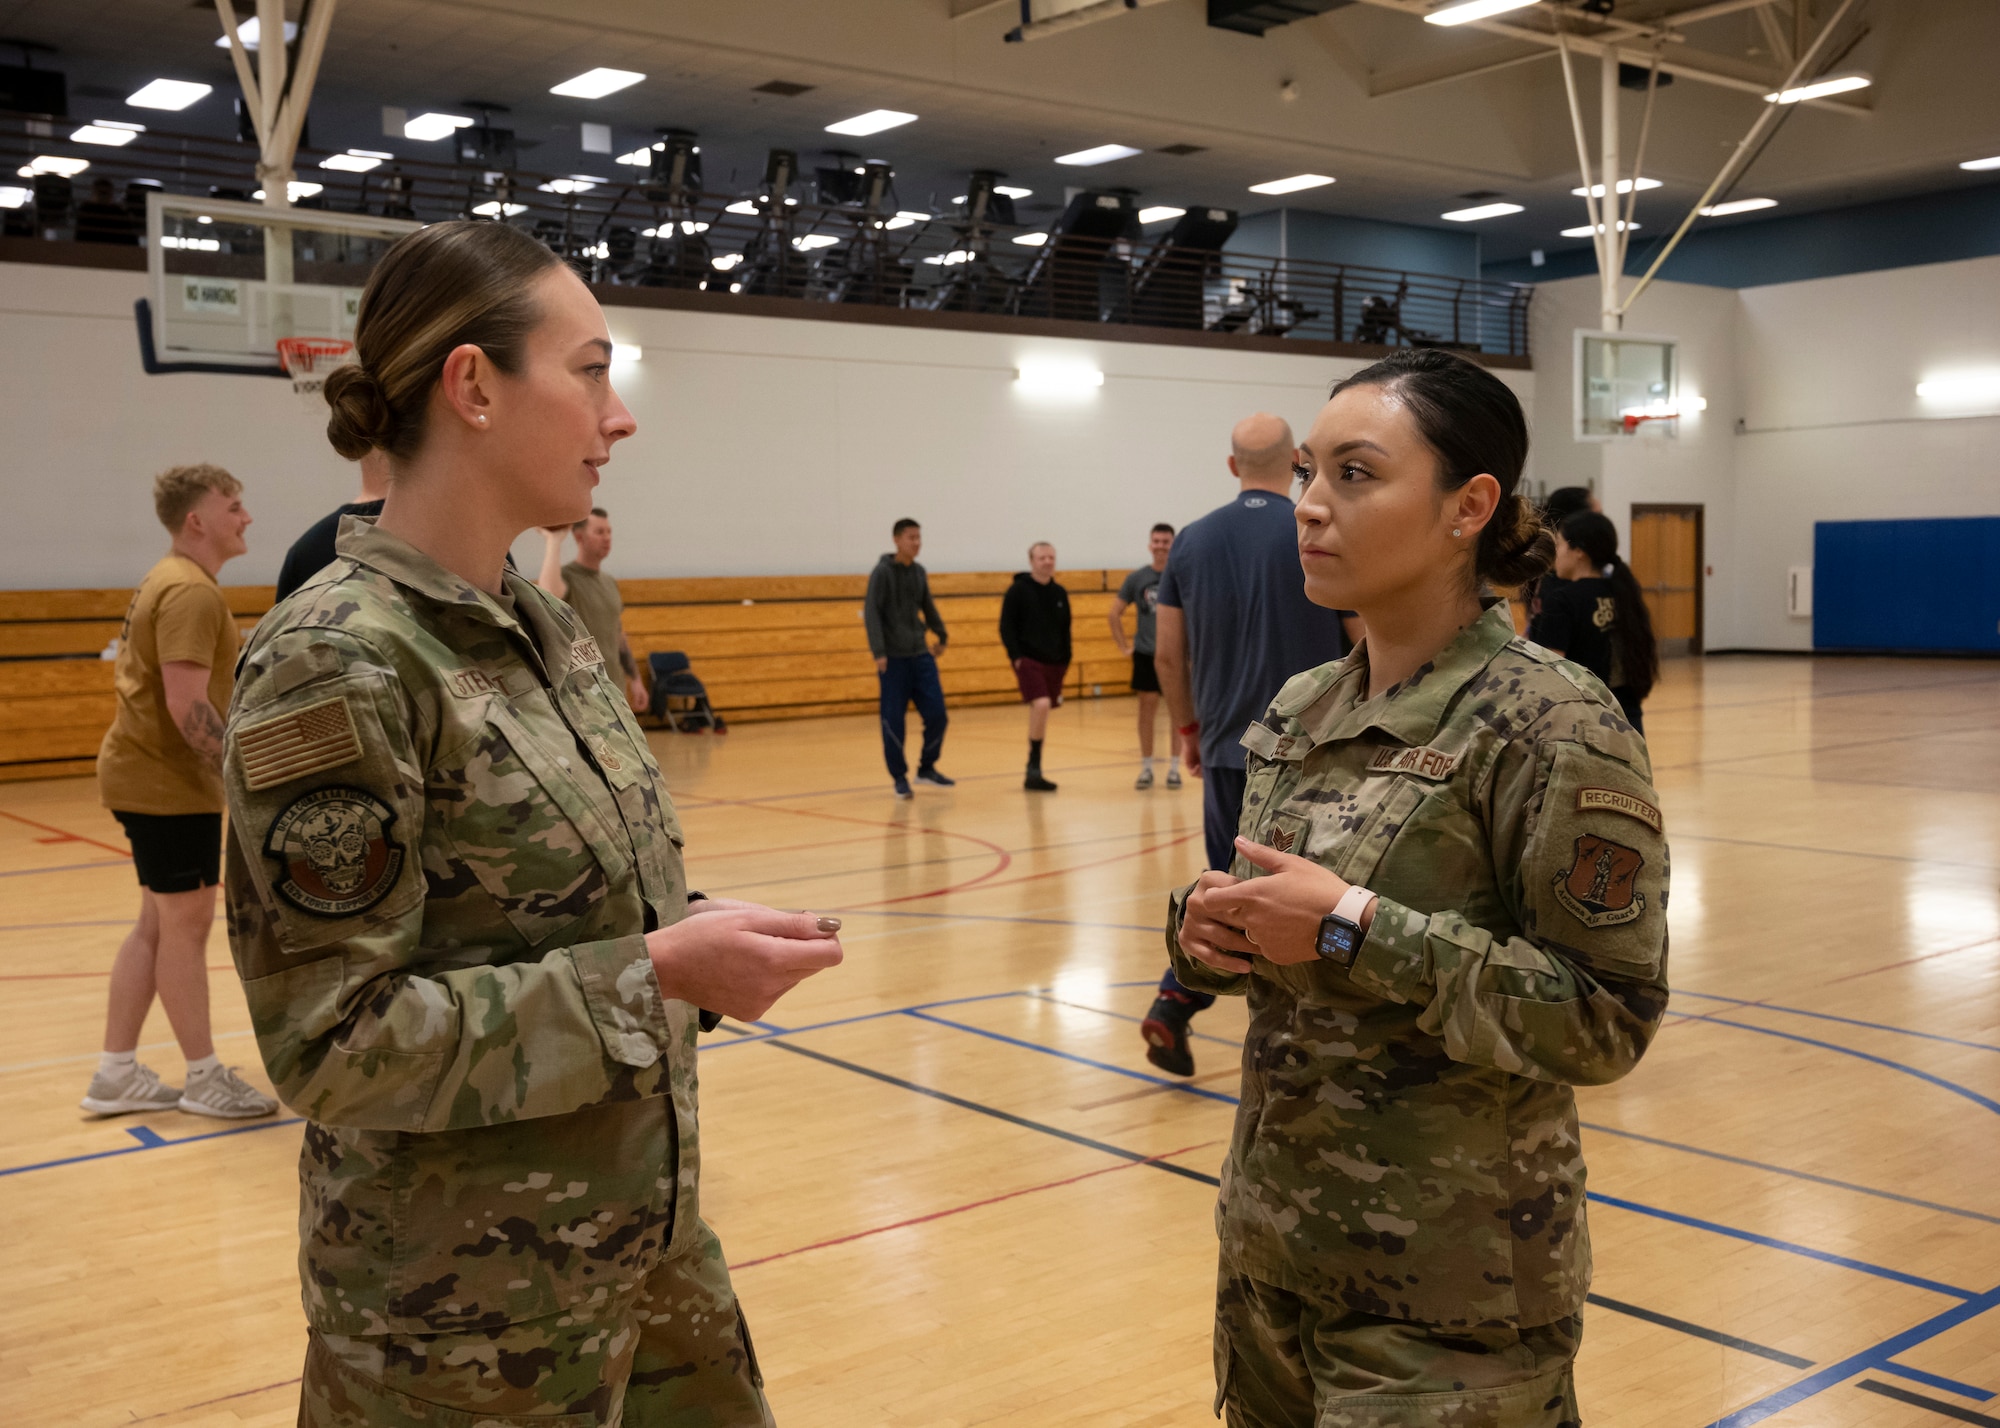 Tech. Sgt. Sophie Stewart, a 162nd Wing production recruiter, discusses the morning physical training plan for student flight with Staff Sgt. Judith Lopez, also a 162nd Wing production recruiter. The student flight, comprised of members that have enlisted but have not attended basic training, report to the wing recruiters each drill weekend. (U.S. Air National Guard photo by Tech. Sgt. George Keck)